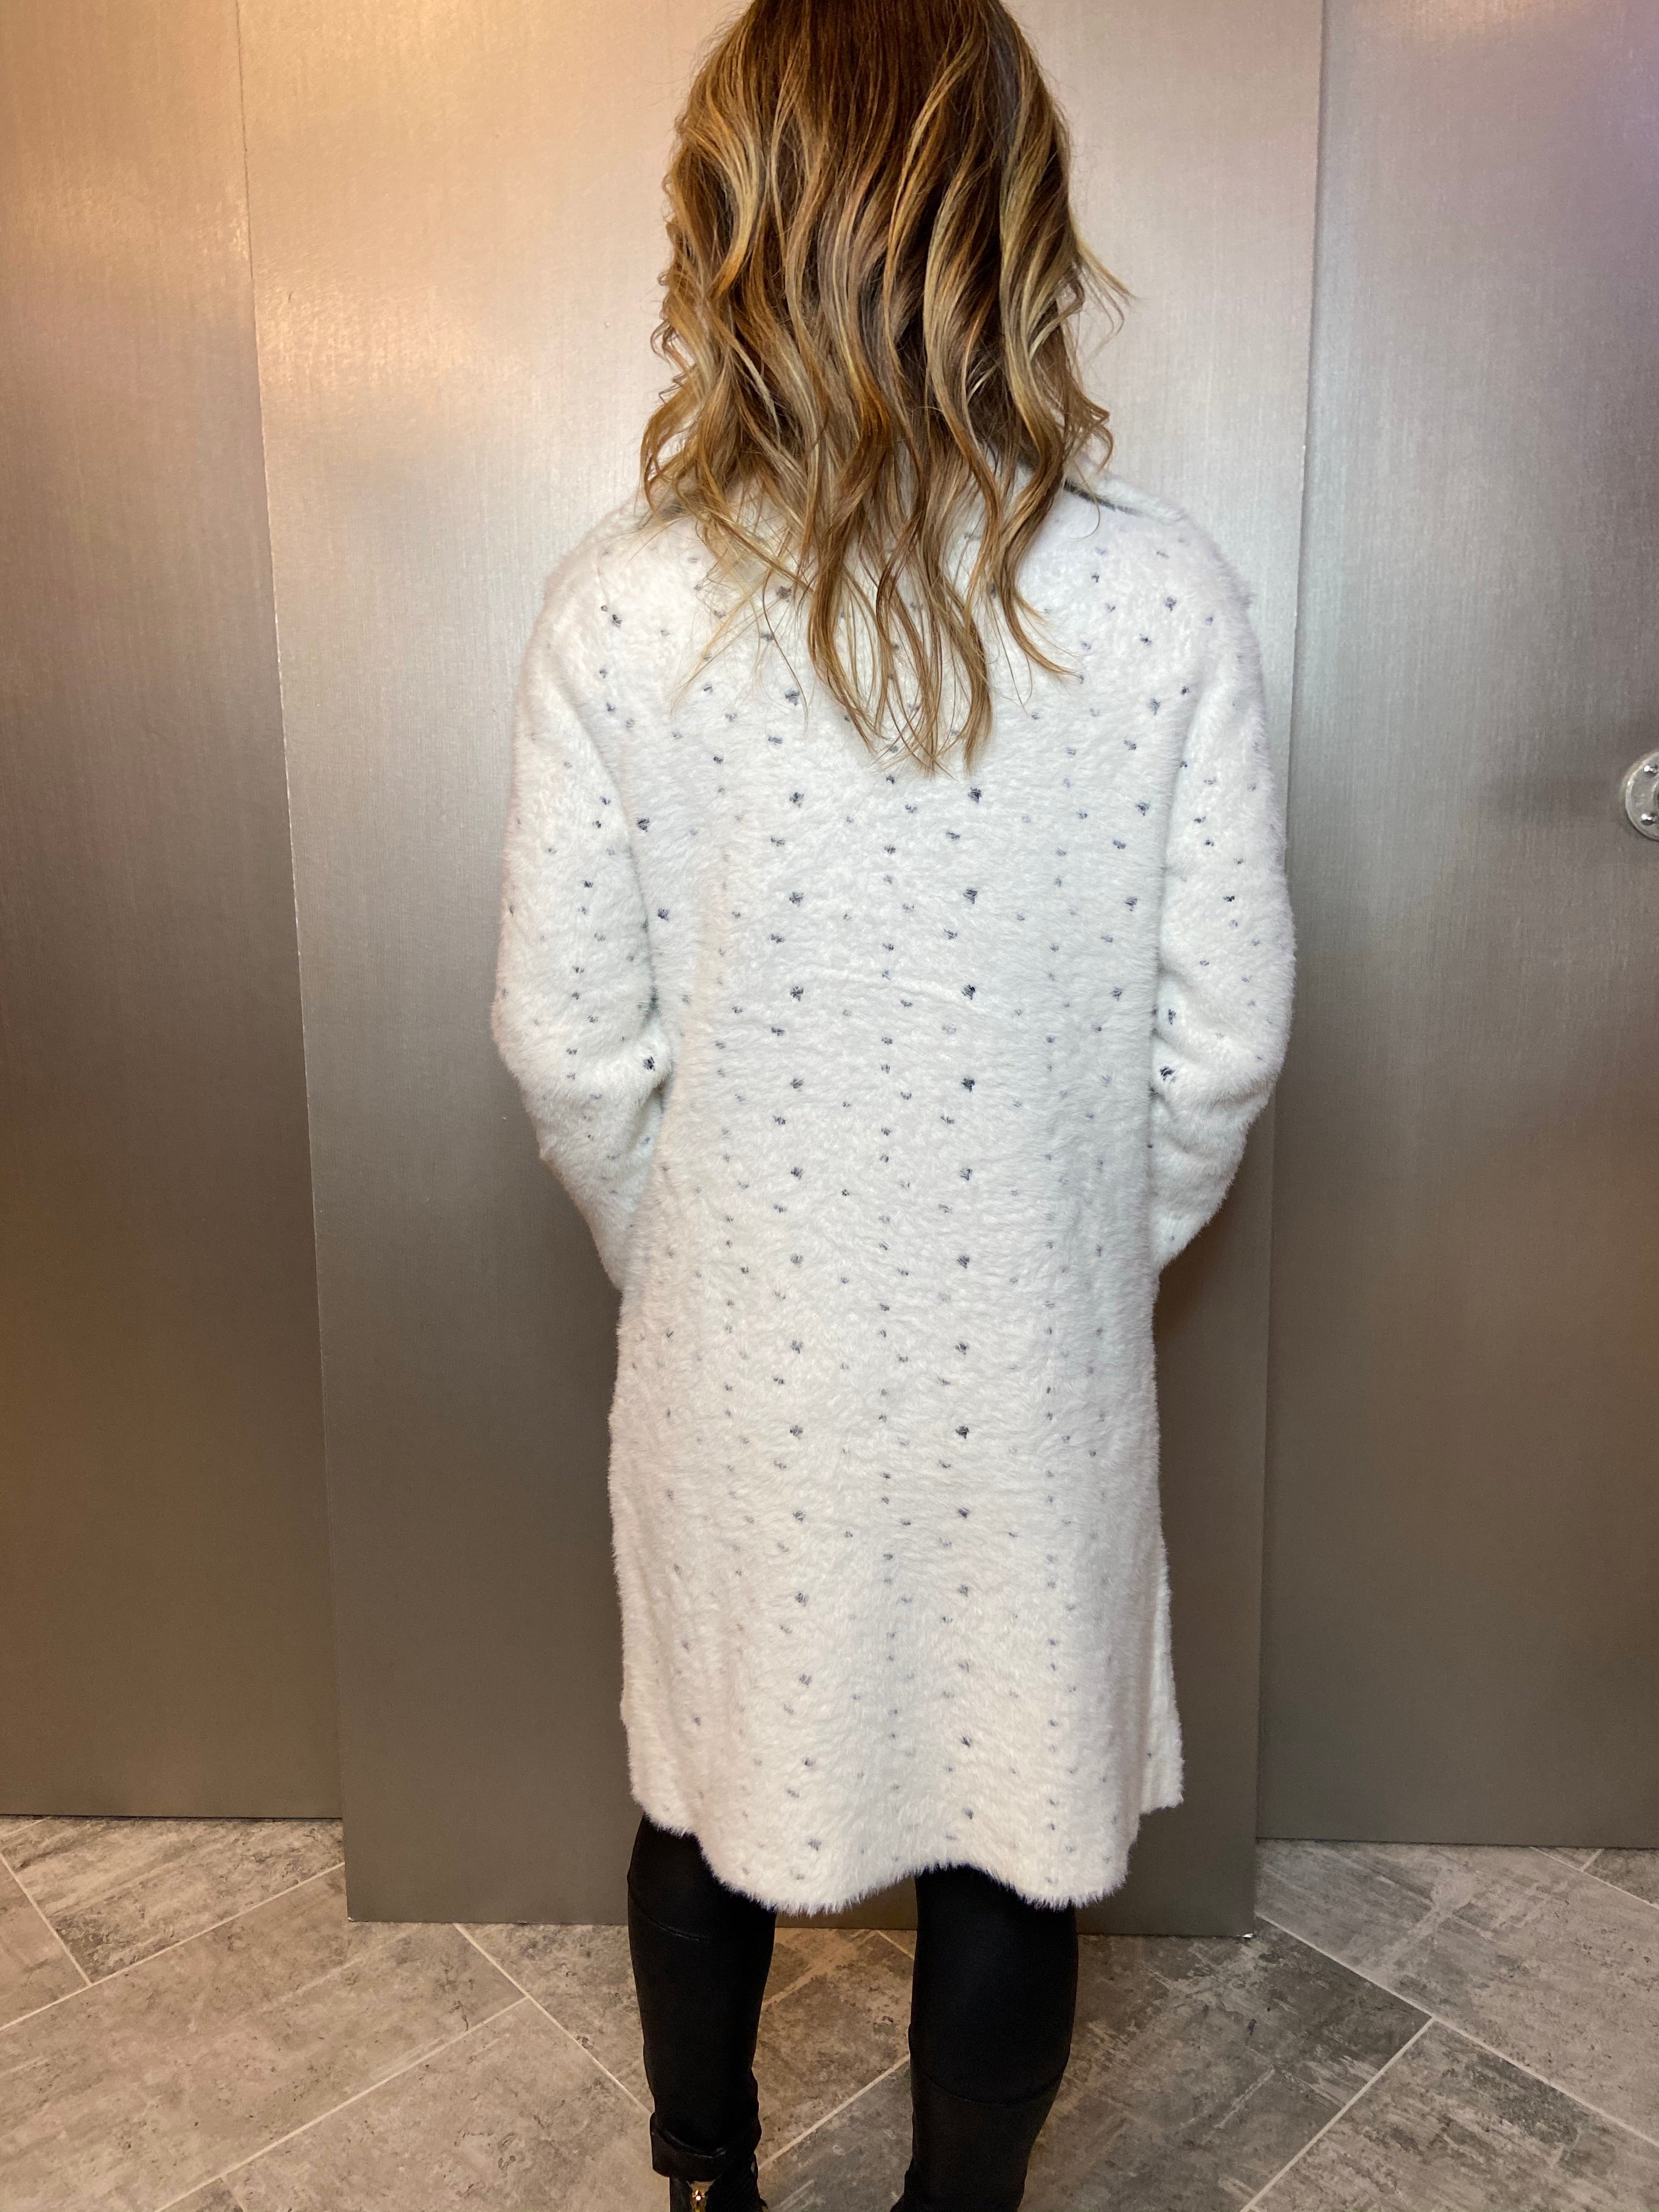 The MUST HAVE white coat